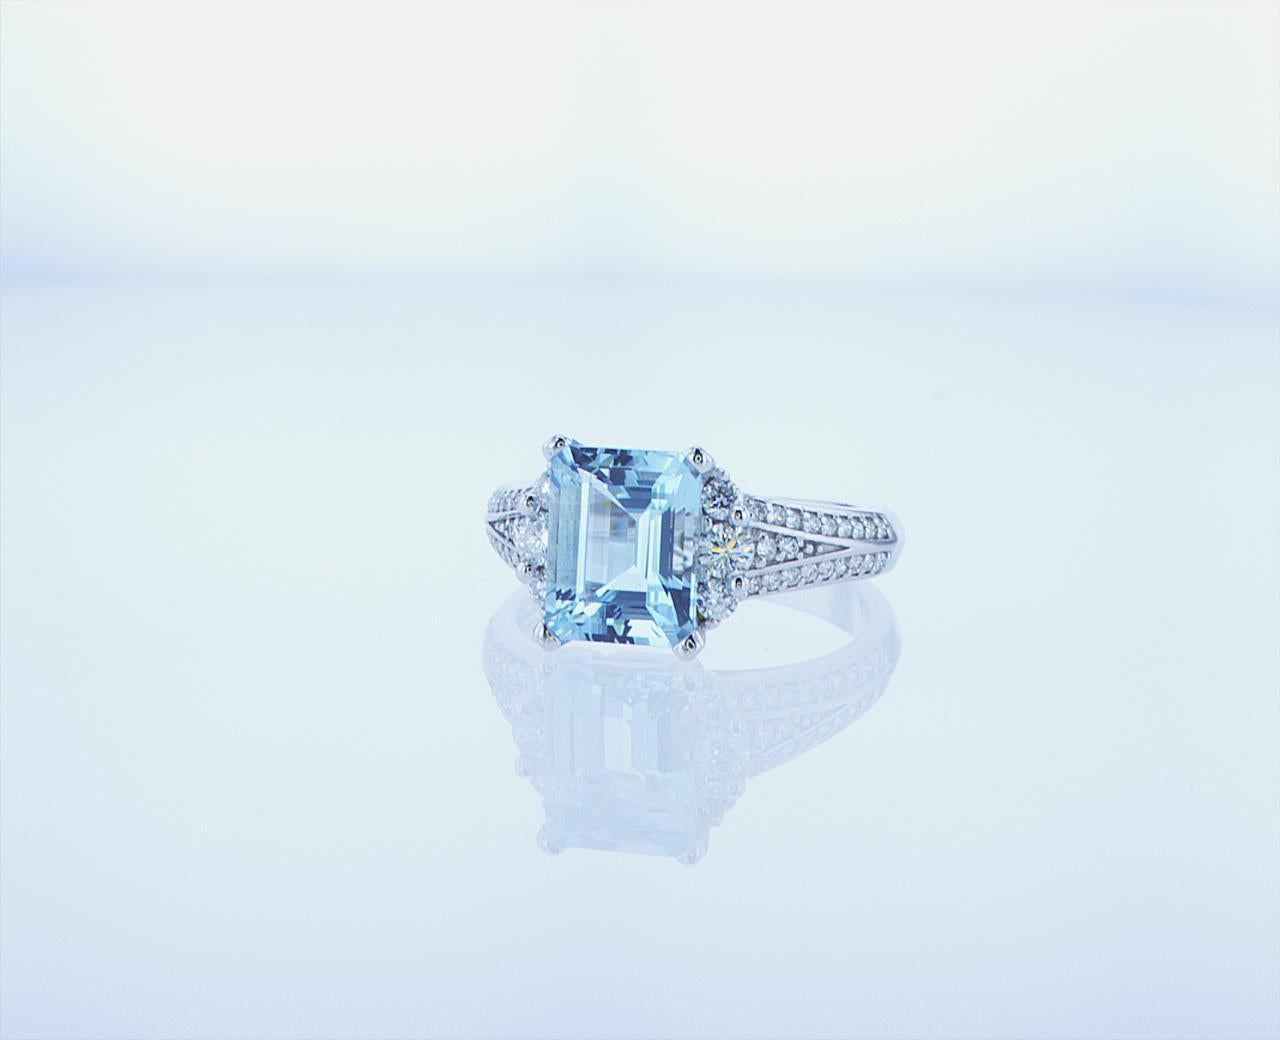 2.24ct Aqua Cocktail Ring in 18k White Gold with 0.41ct TW of G/H Color, VS Clarity Accent Diamonds.
